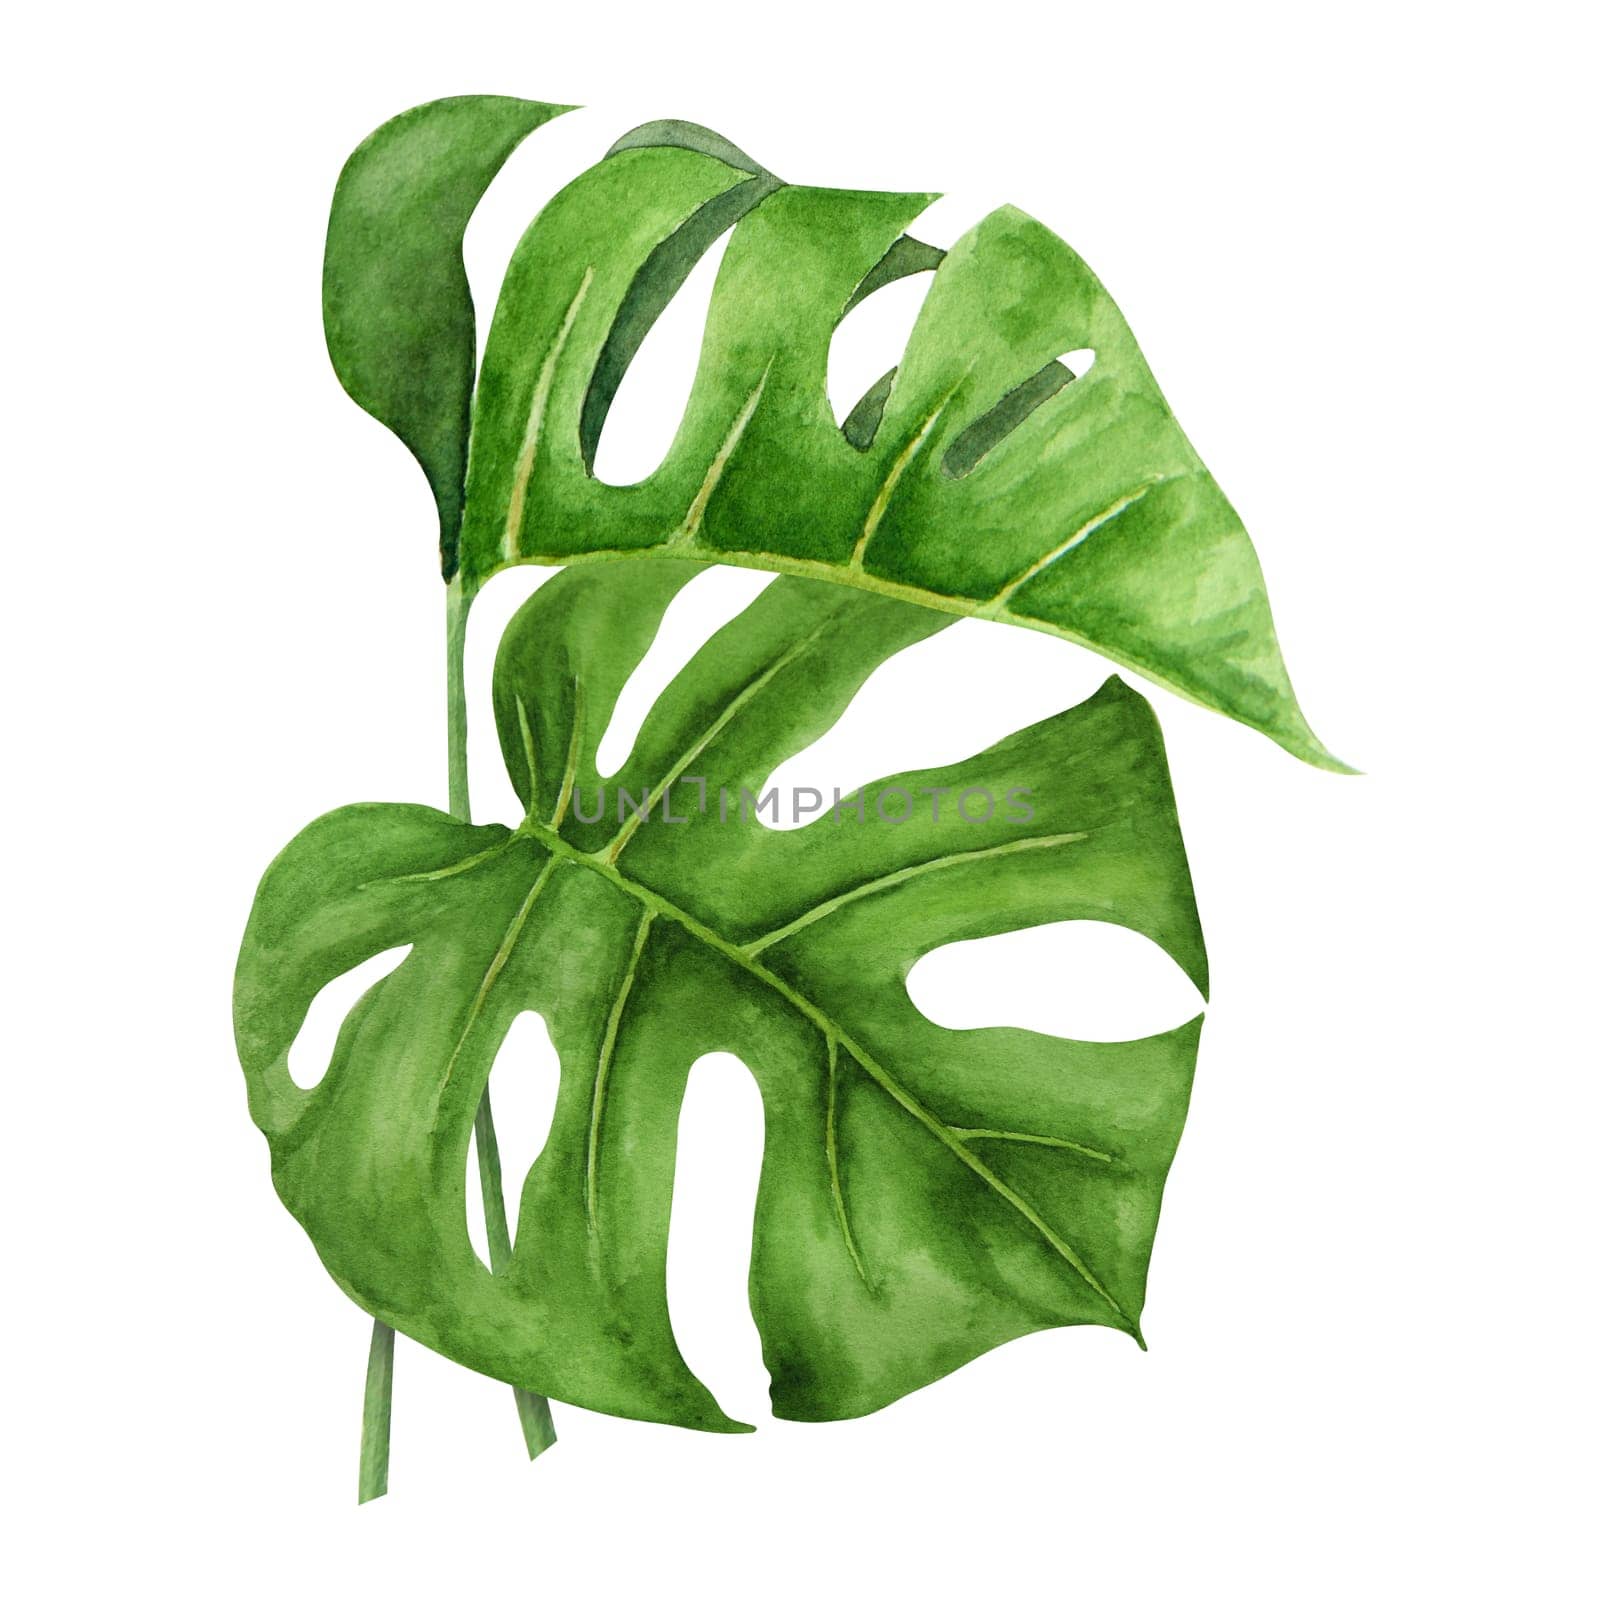 Green Monstera leaves. Watercolor hand drawn illustration of tropical plant for travel guides, cosmetic, spa, massage salon prints, wedding invitations, cards, textile, packing. Jungle liana clip art